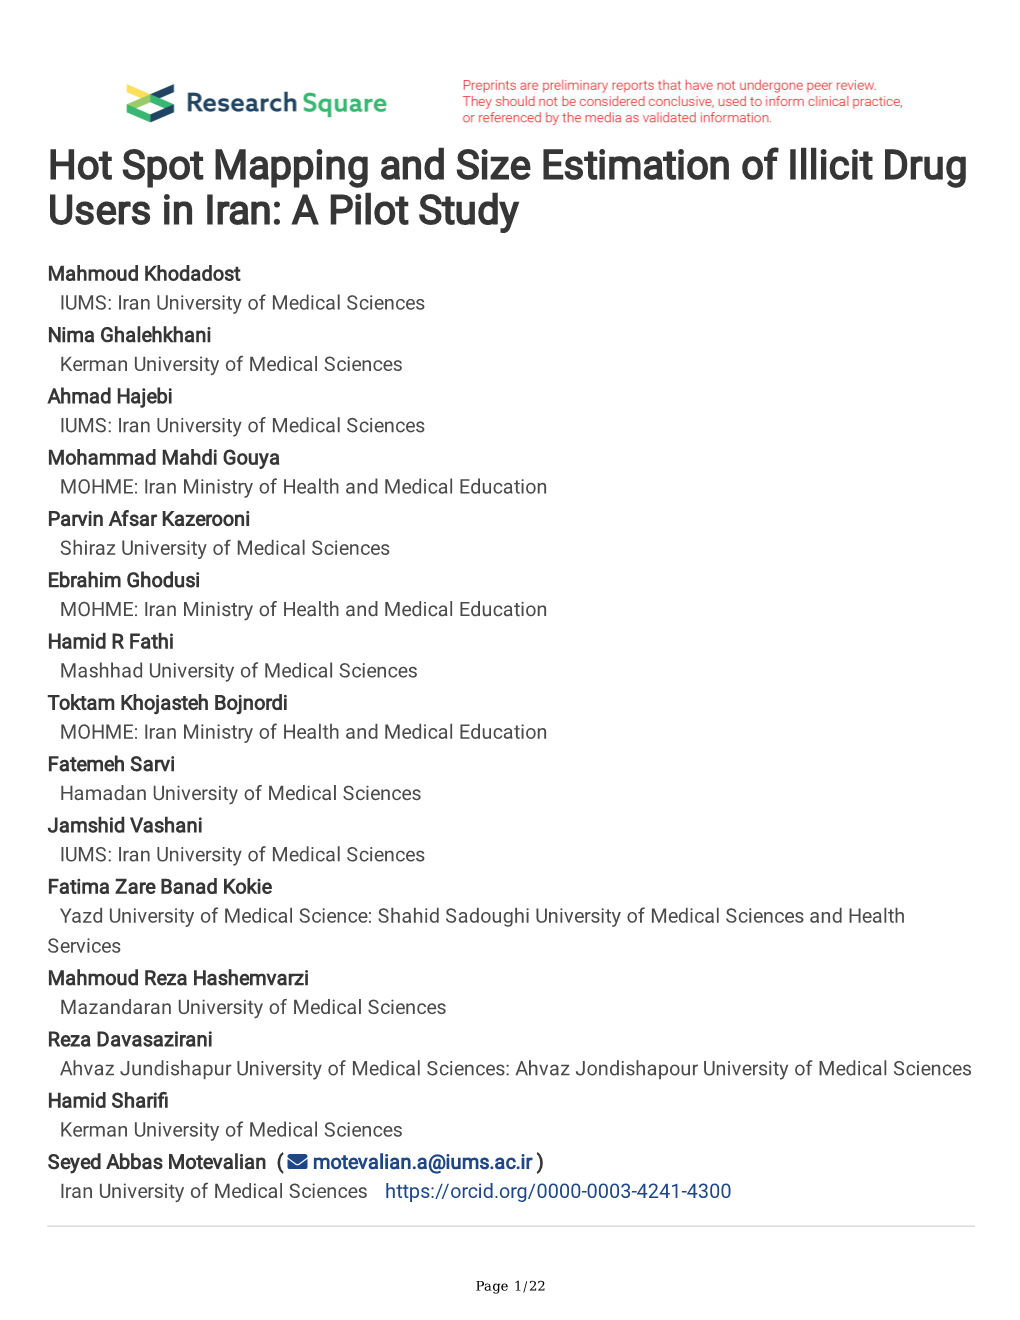 Hot Spot Mapping and Size Estimation of Illicit Drug Users in Iran: a Pilot Study